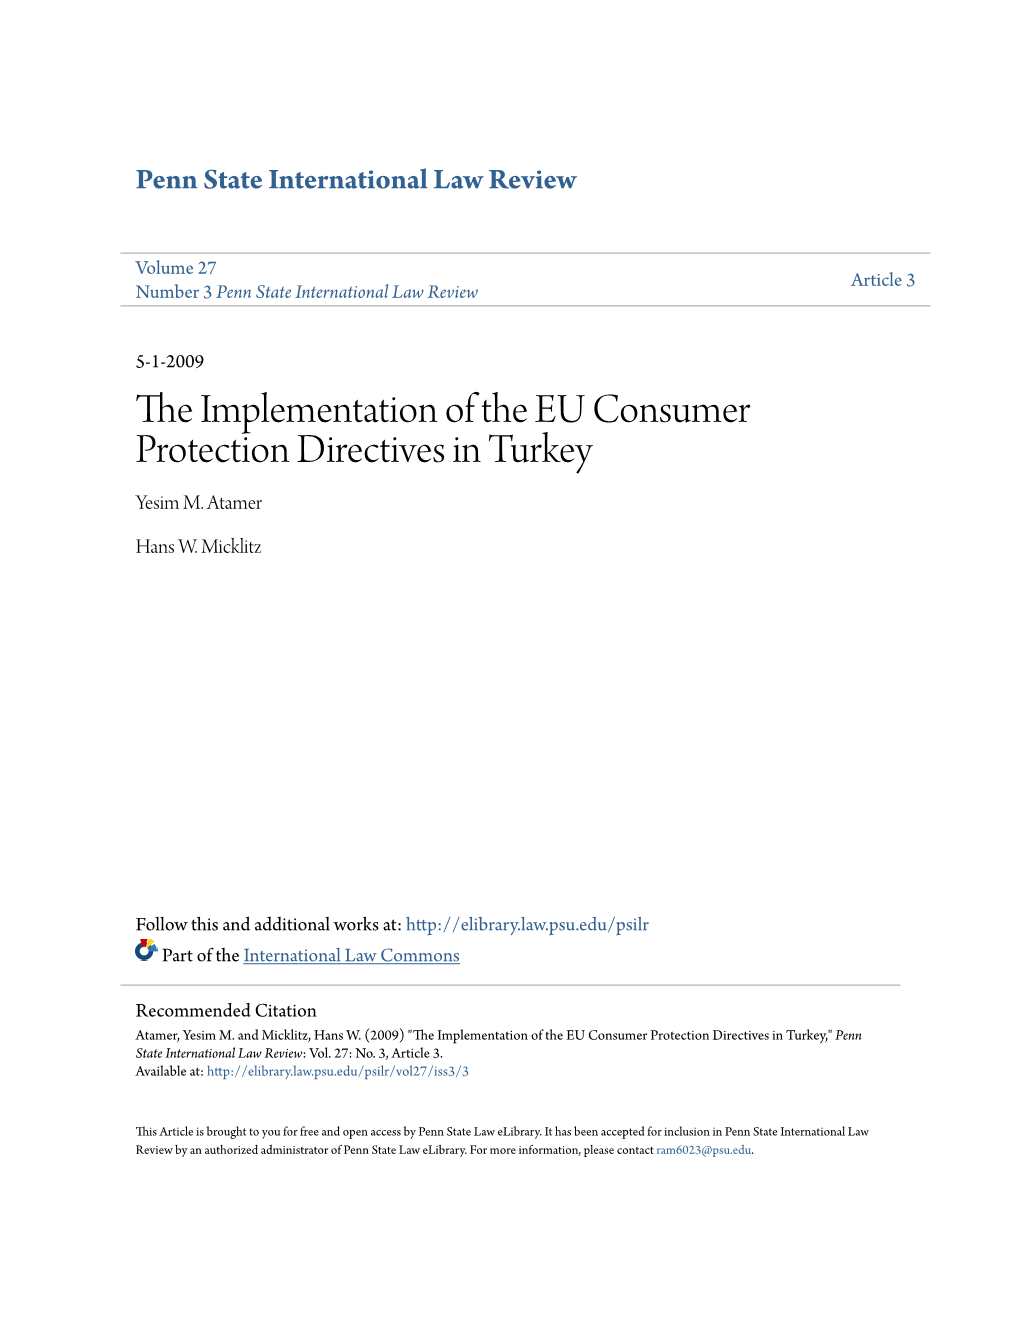 The Implementation of the EU Consumer Protection Directives in Turkey